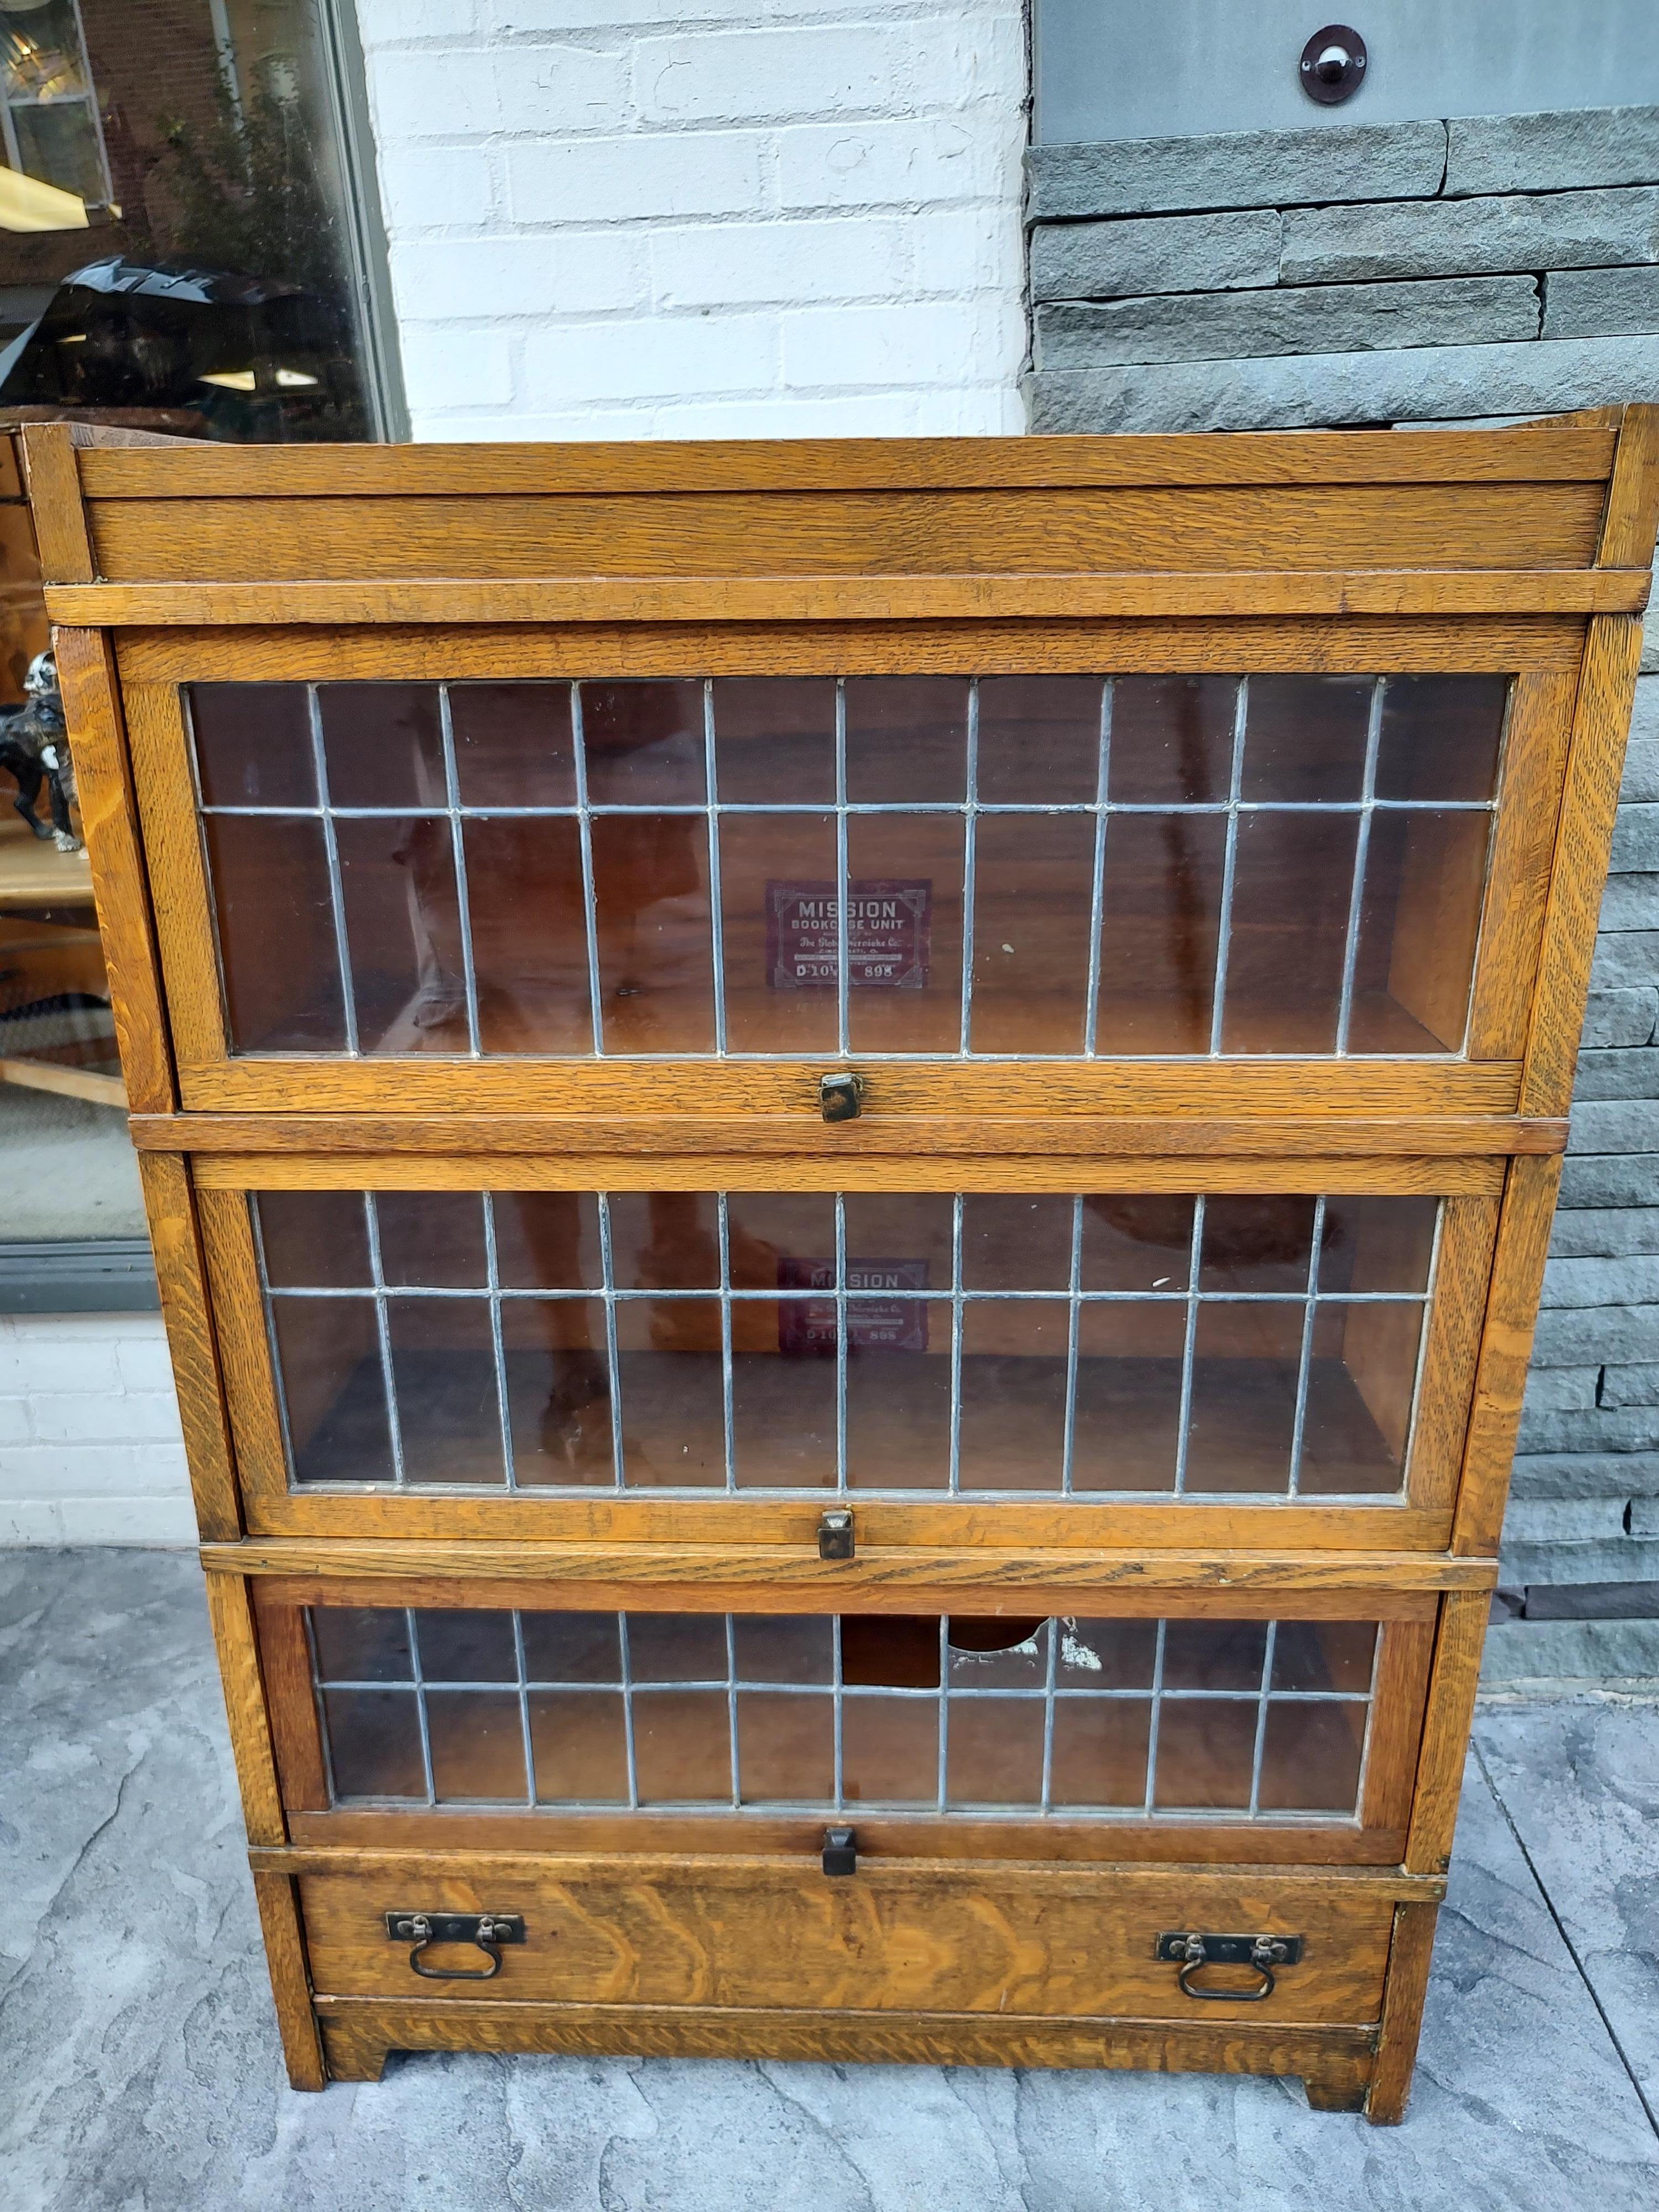 Mission Art's & Crafts 5 Section Leaded Door Bookcase by Globe Wernicke For Sale 4